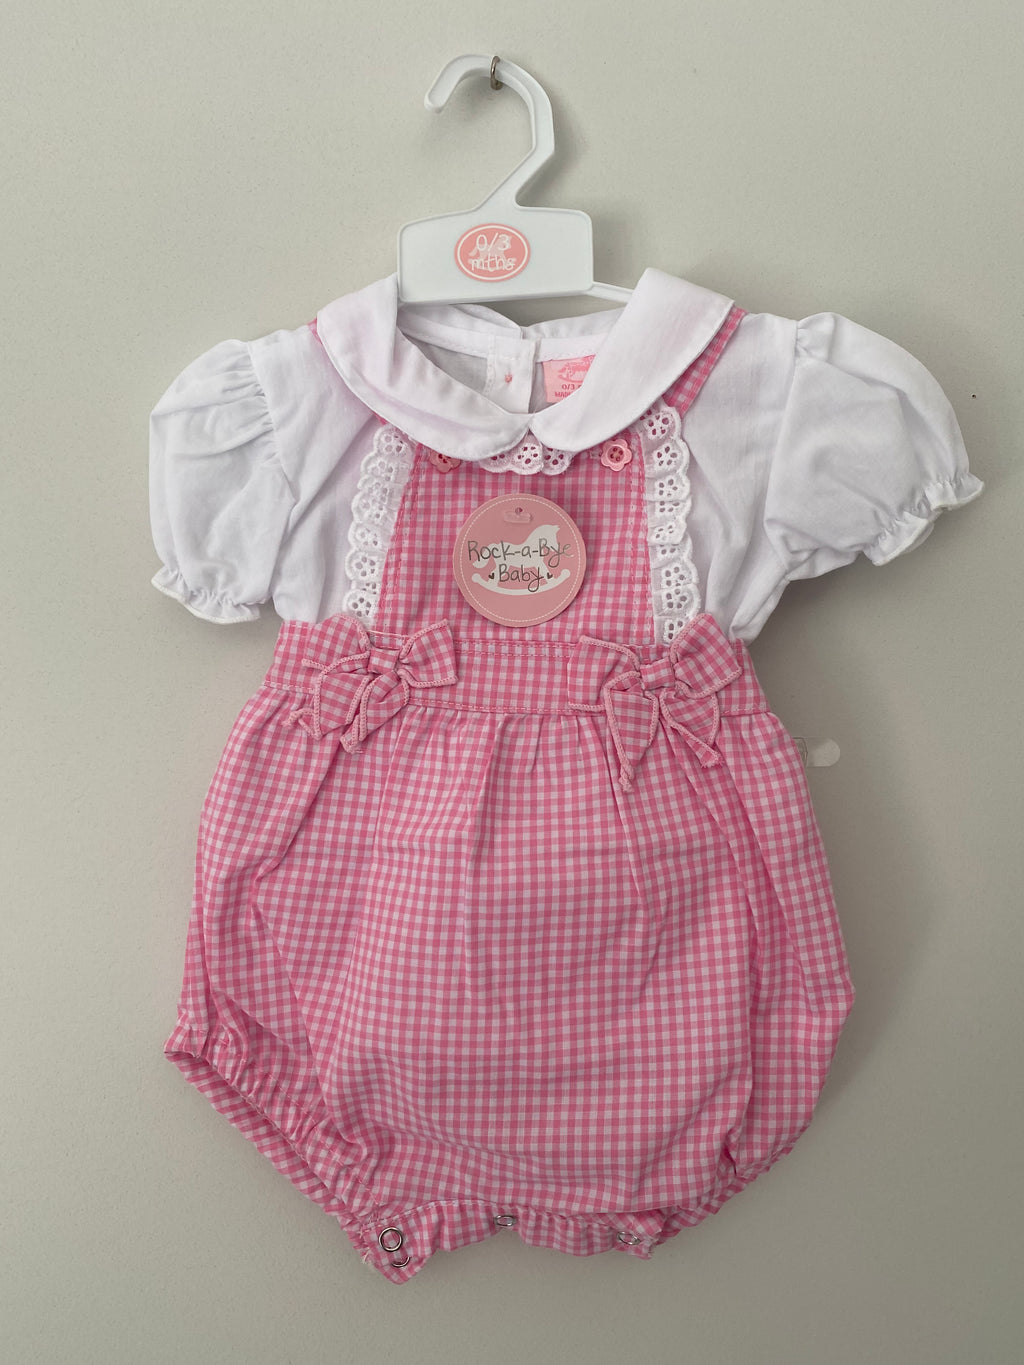 Rock-A-Bye Baby - Pink Checked Romper -  W22040